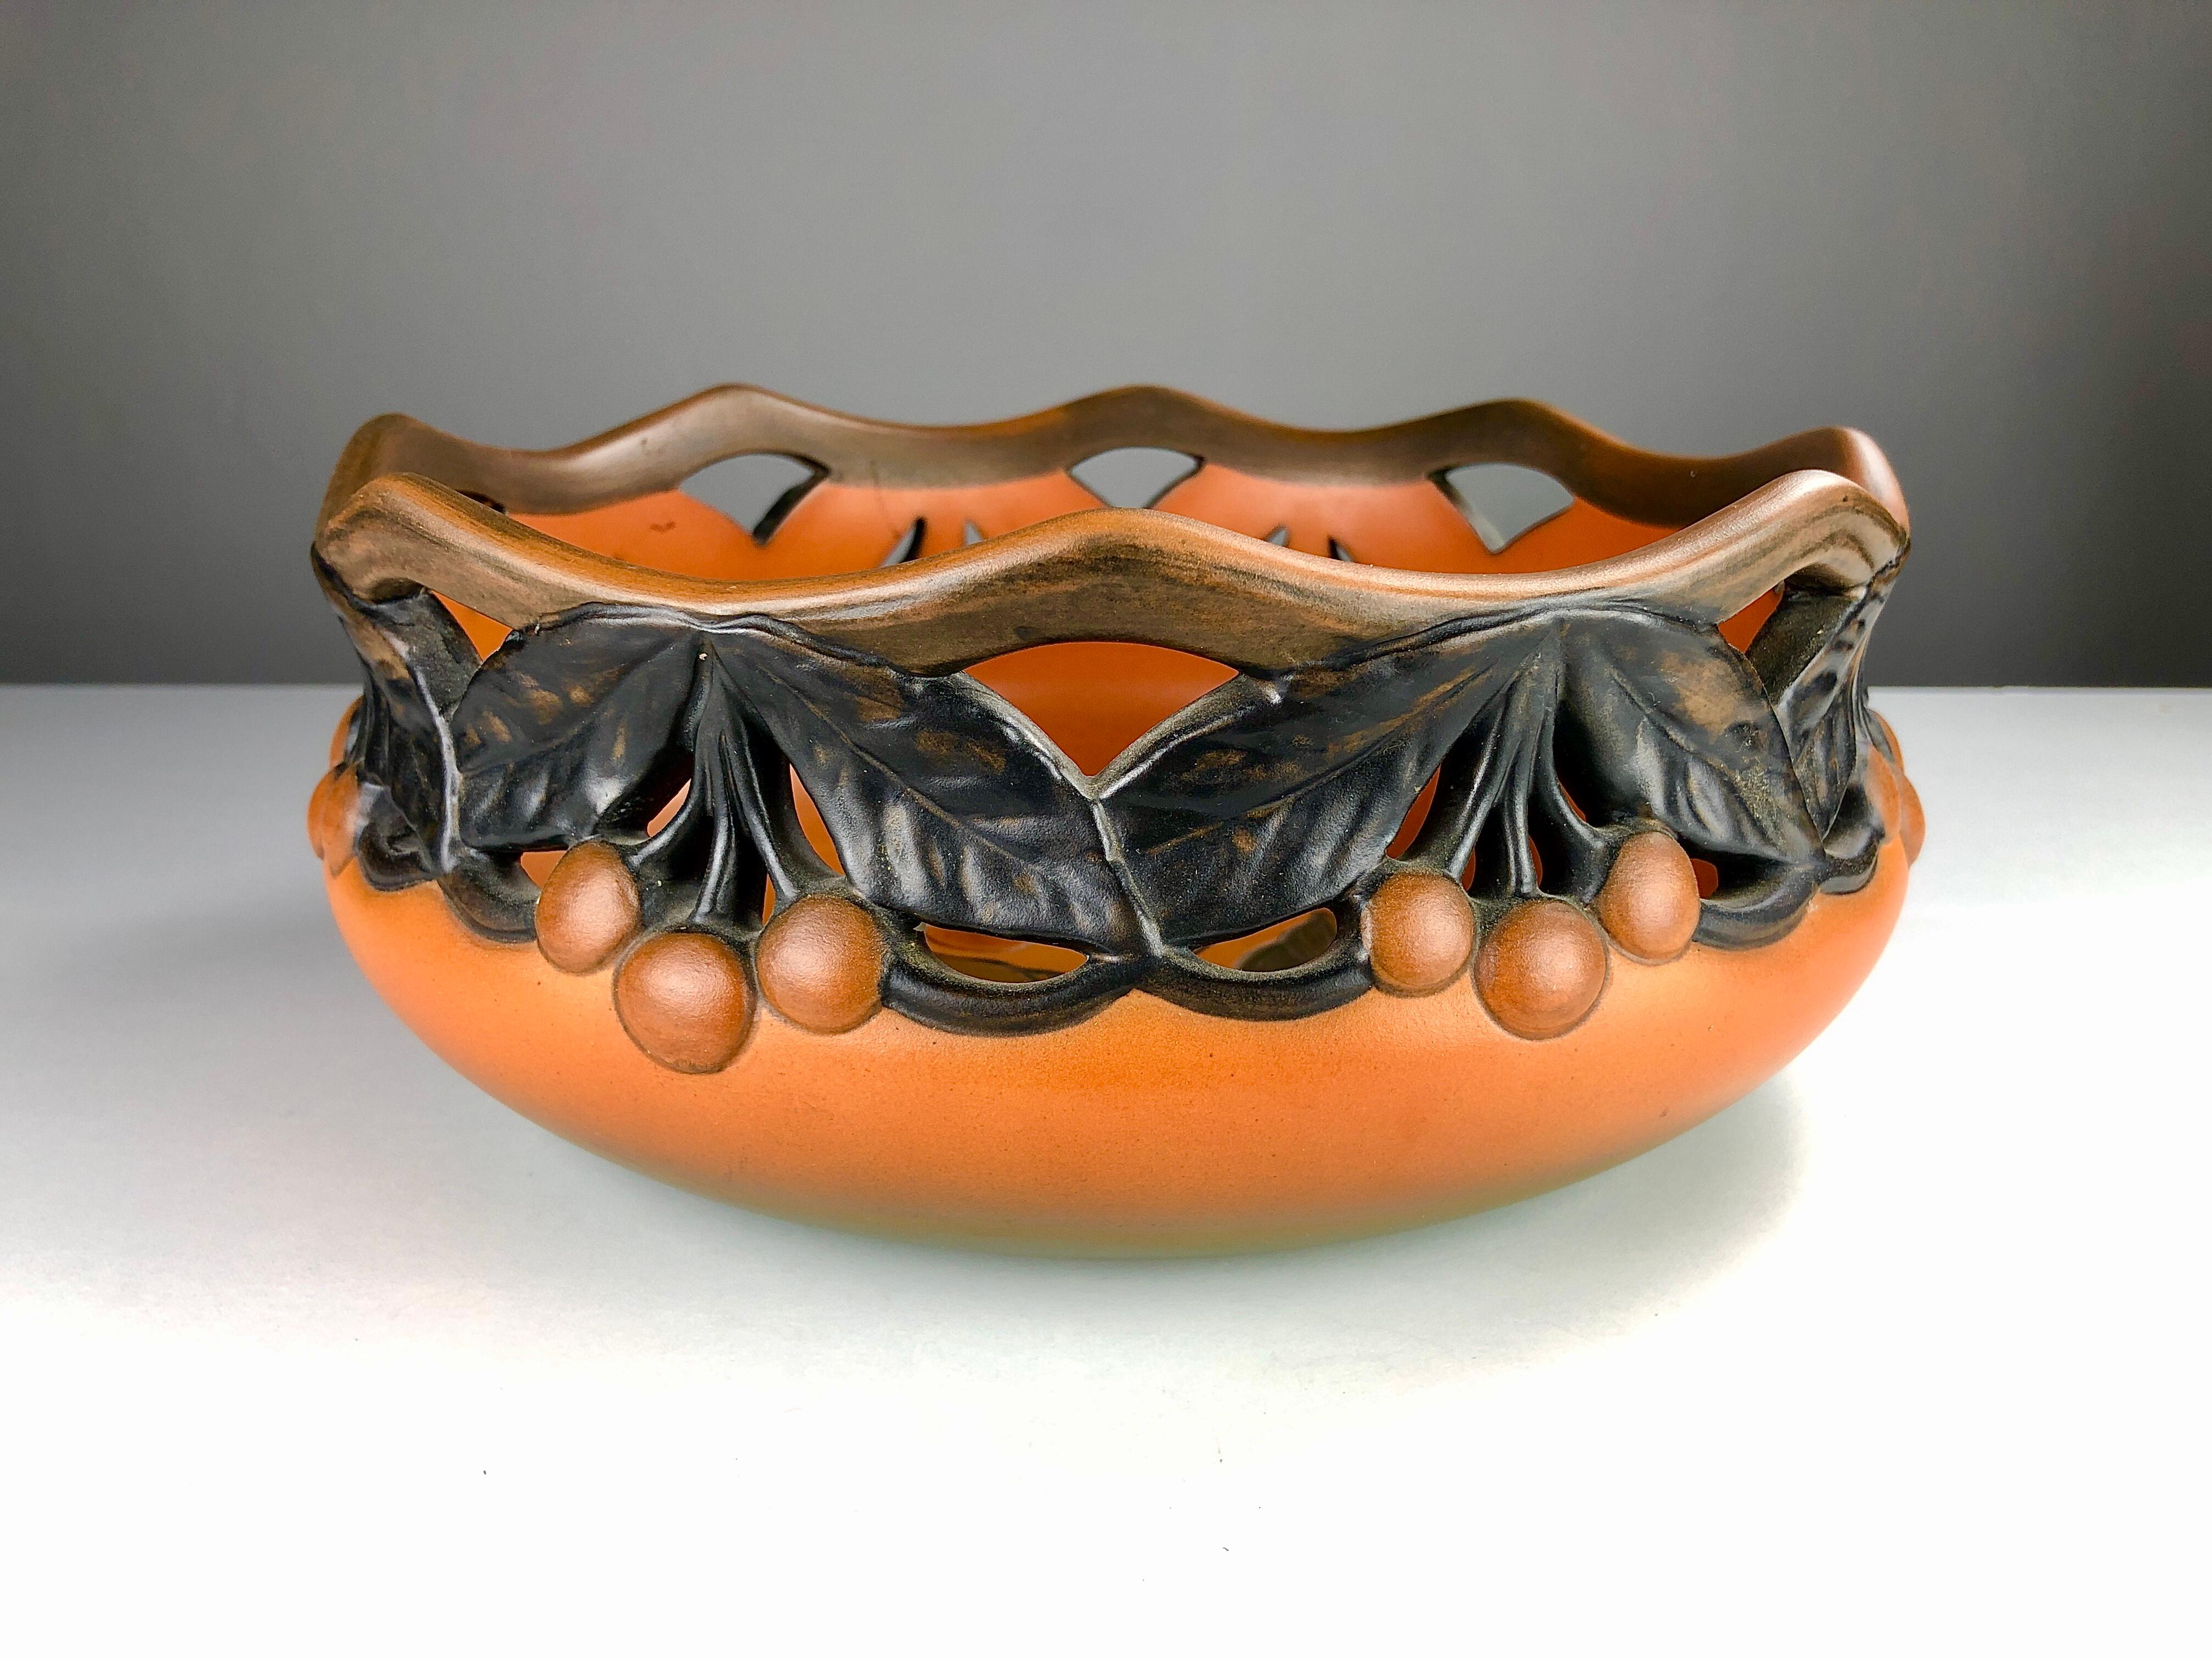 Art Nouveau bowl by the Danish sculptor Karen Hagen for P. Ipsens Enke in 1909.

The art nuveau cherry bowl is in excellent condition.

P. Ipsens Enke (1843 - 1955) was a very succesfull manufactorer that especially during the first part of the